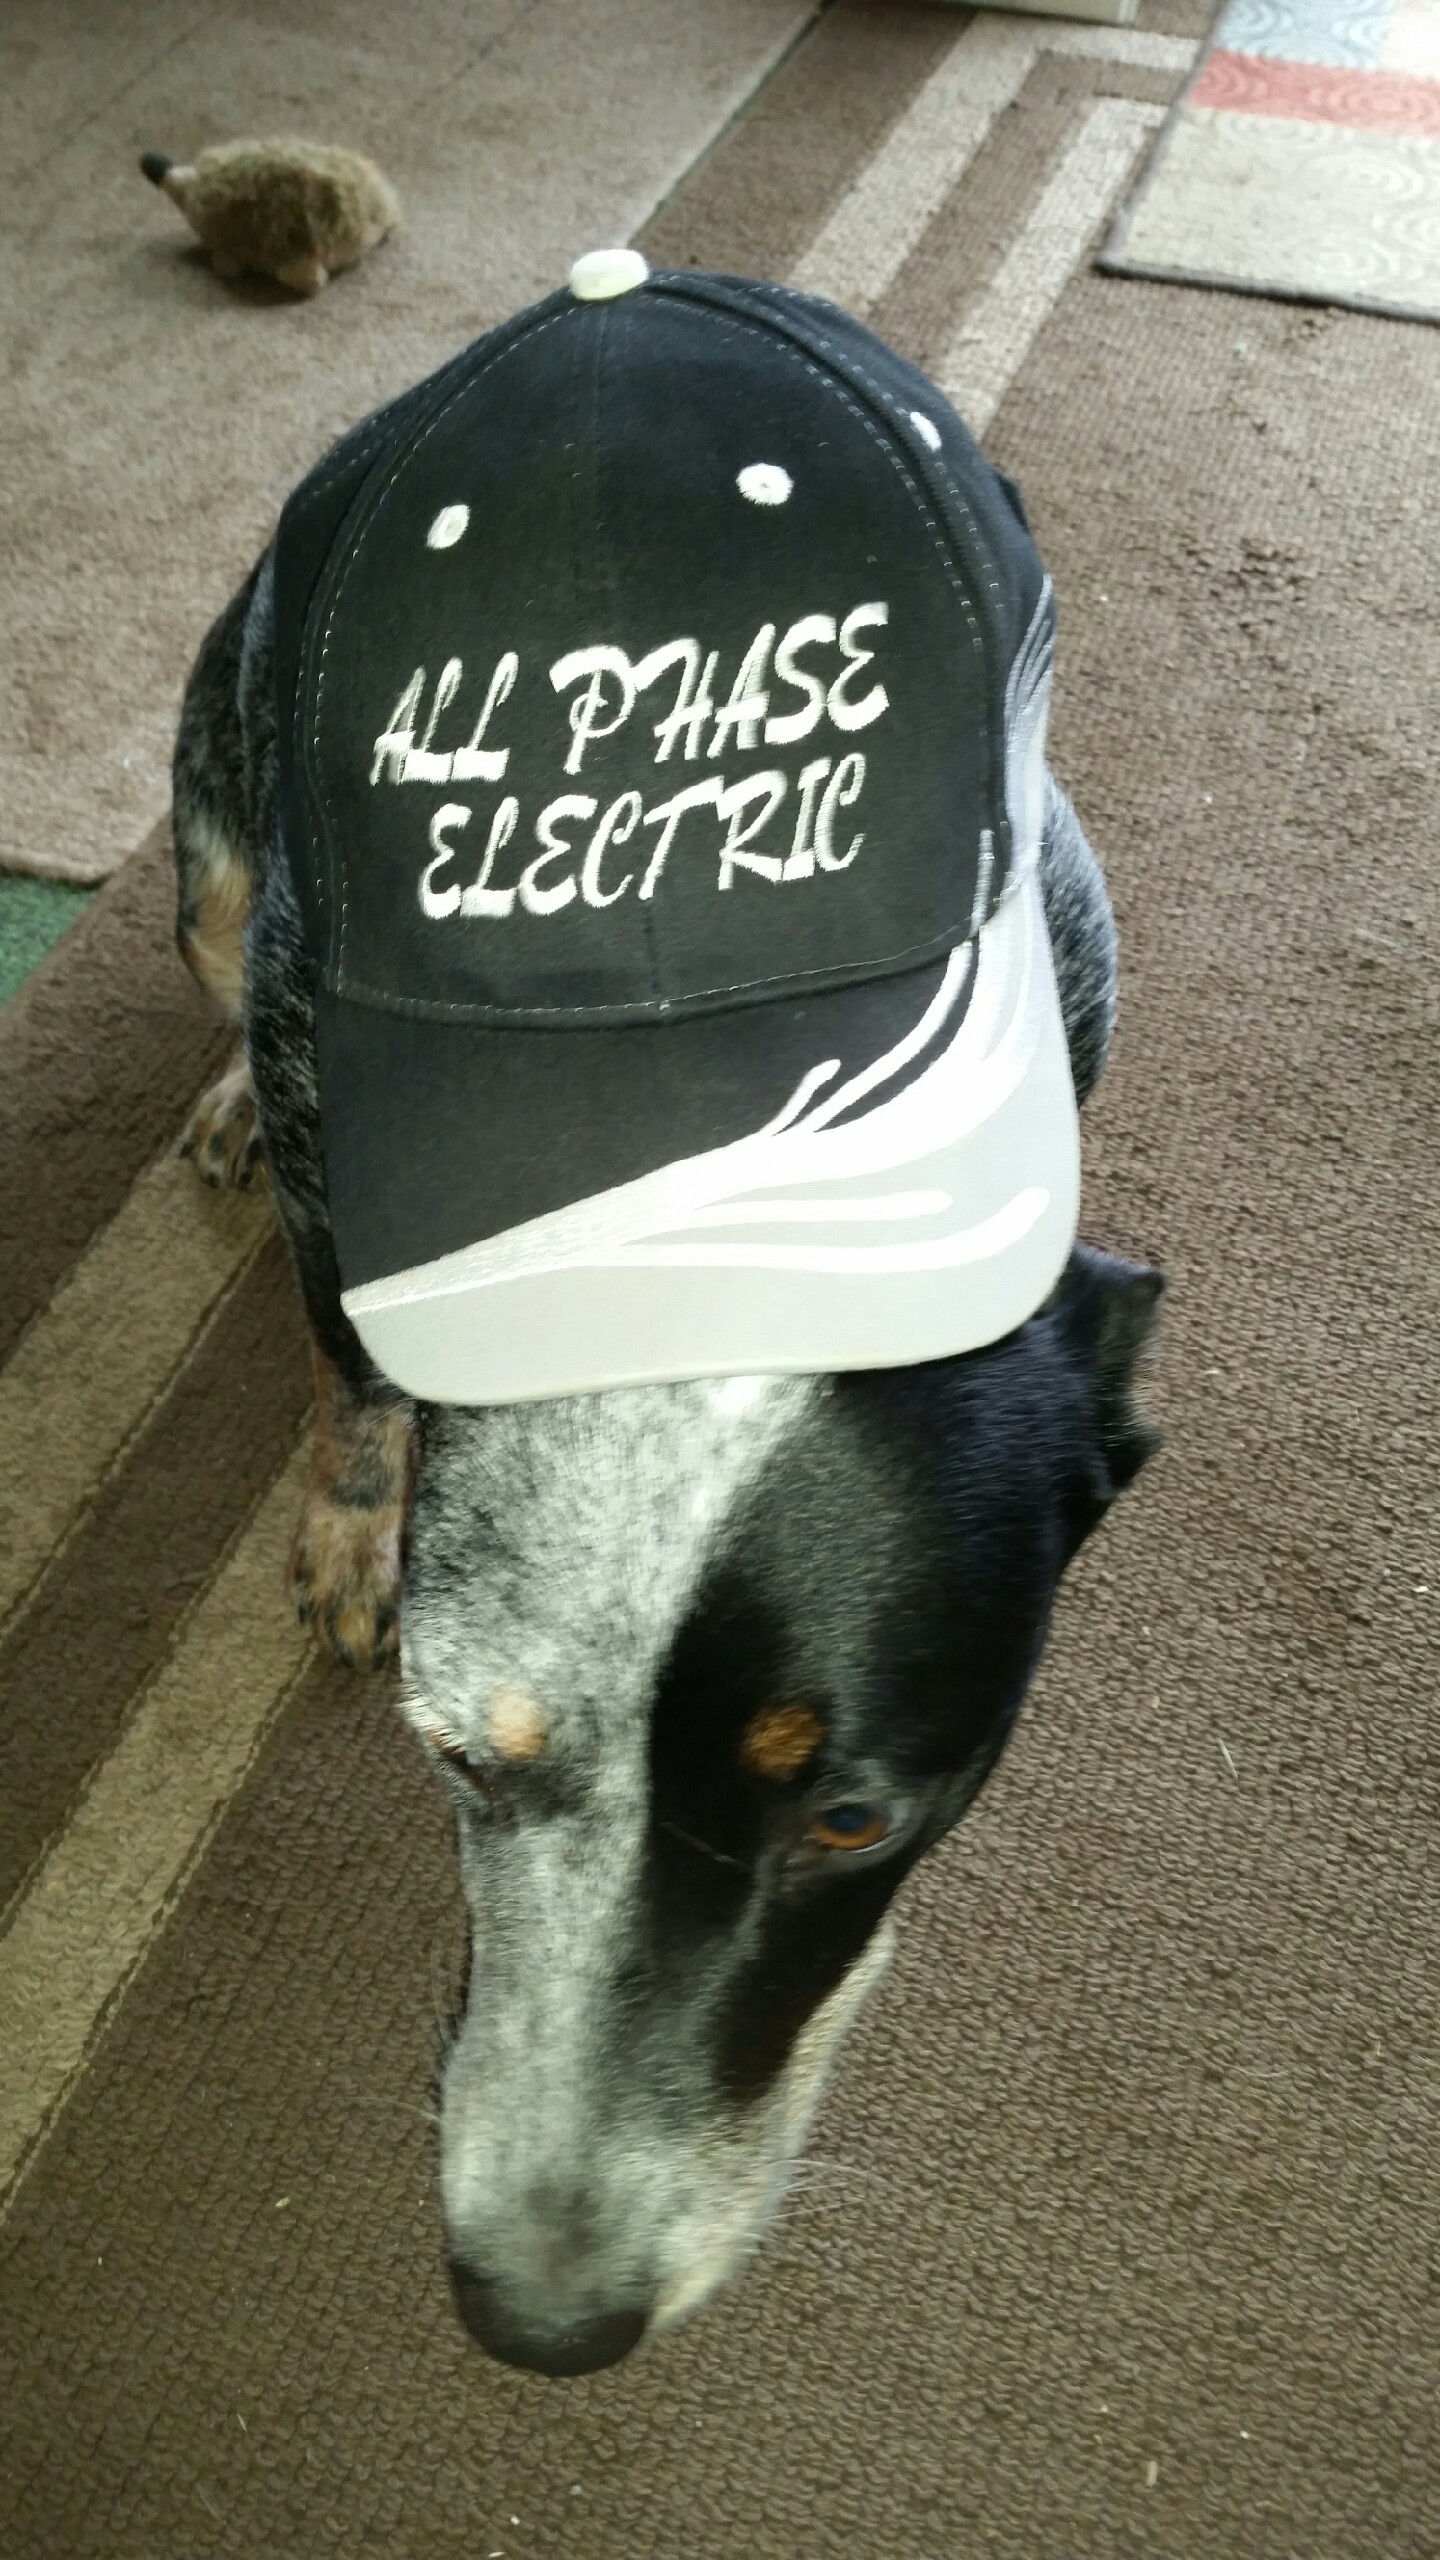 A dog wearing an All Phase Electric, LLC ball cap